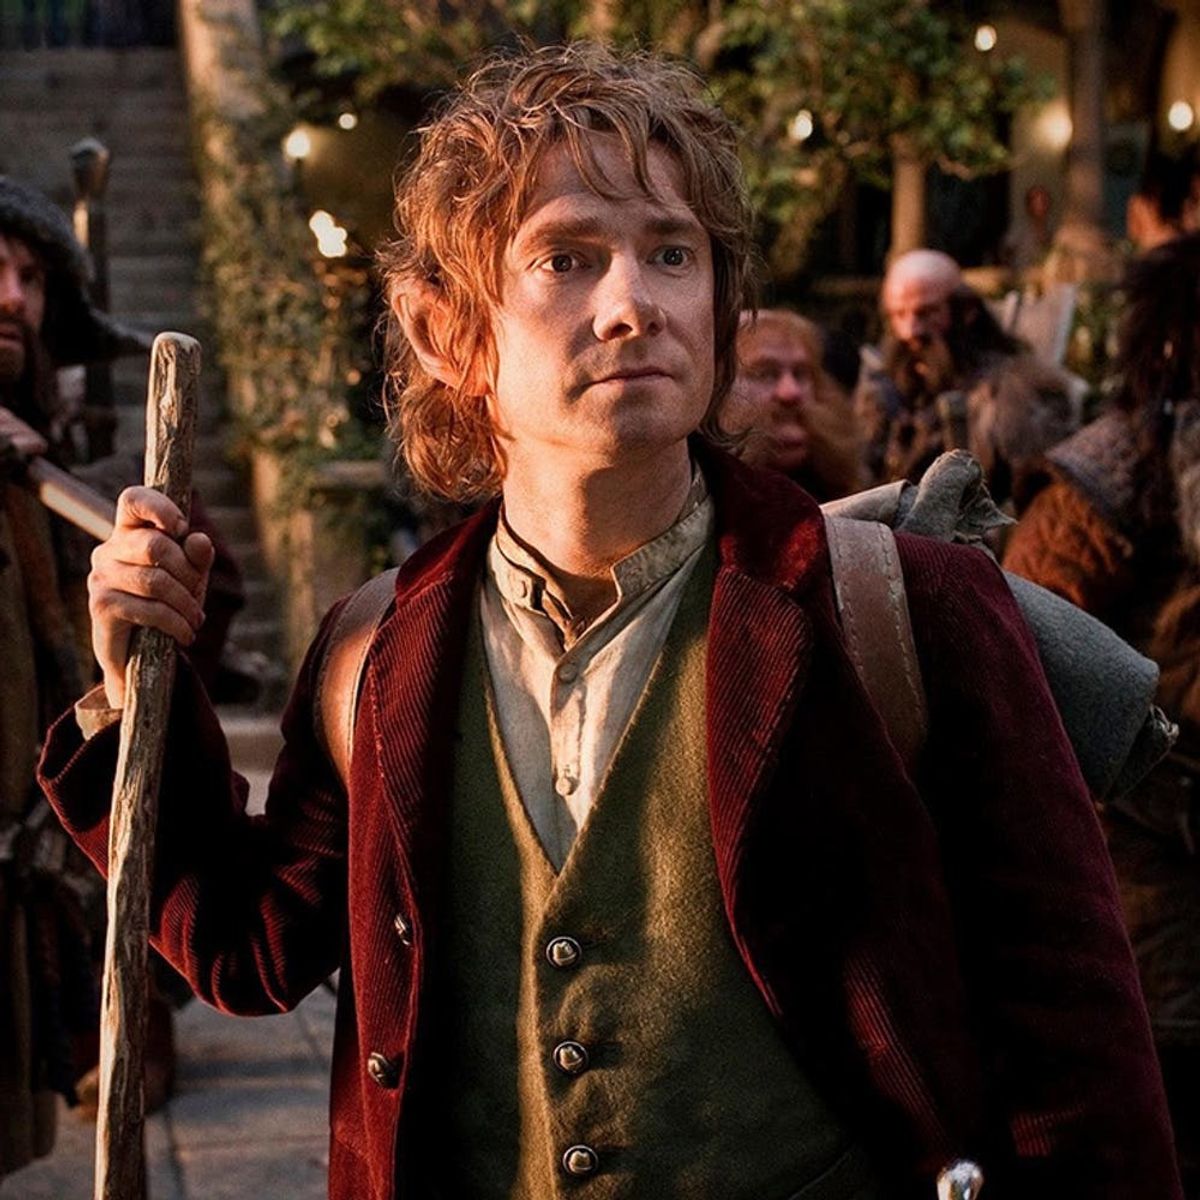 Lord of the Rings Fans Listen Up: Hobbits May Have Been Real